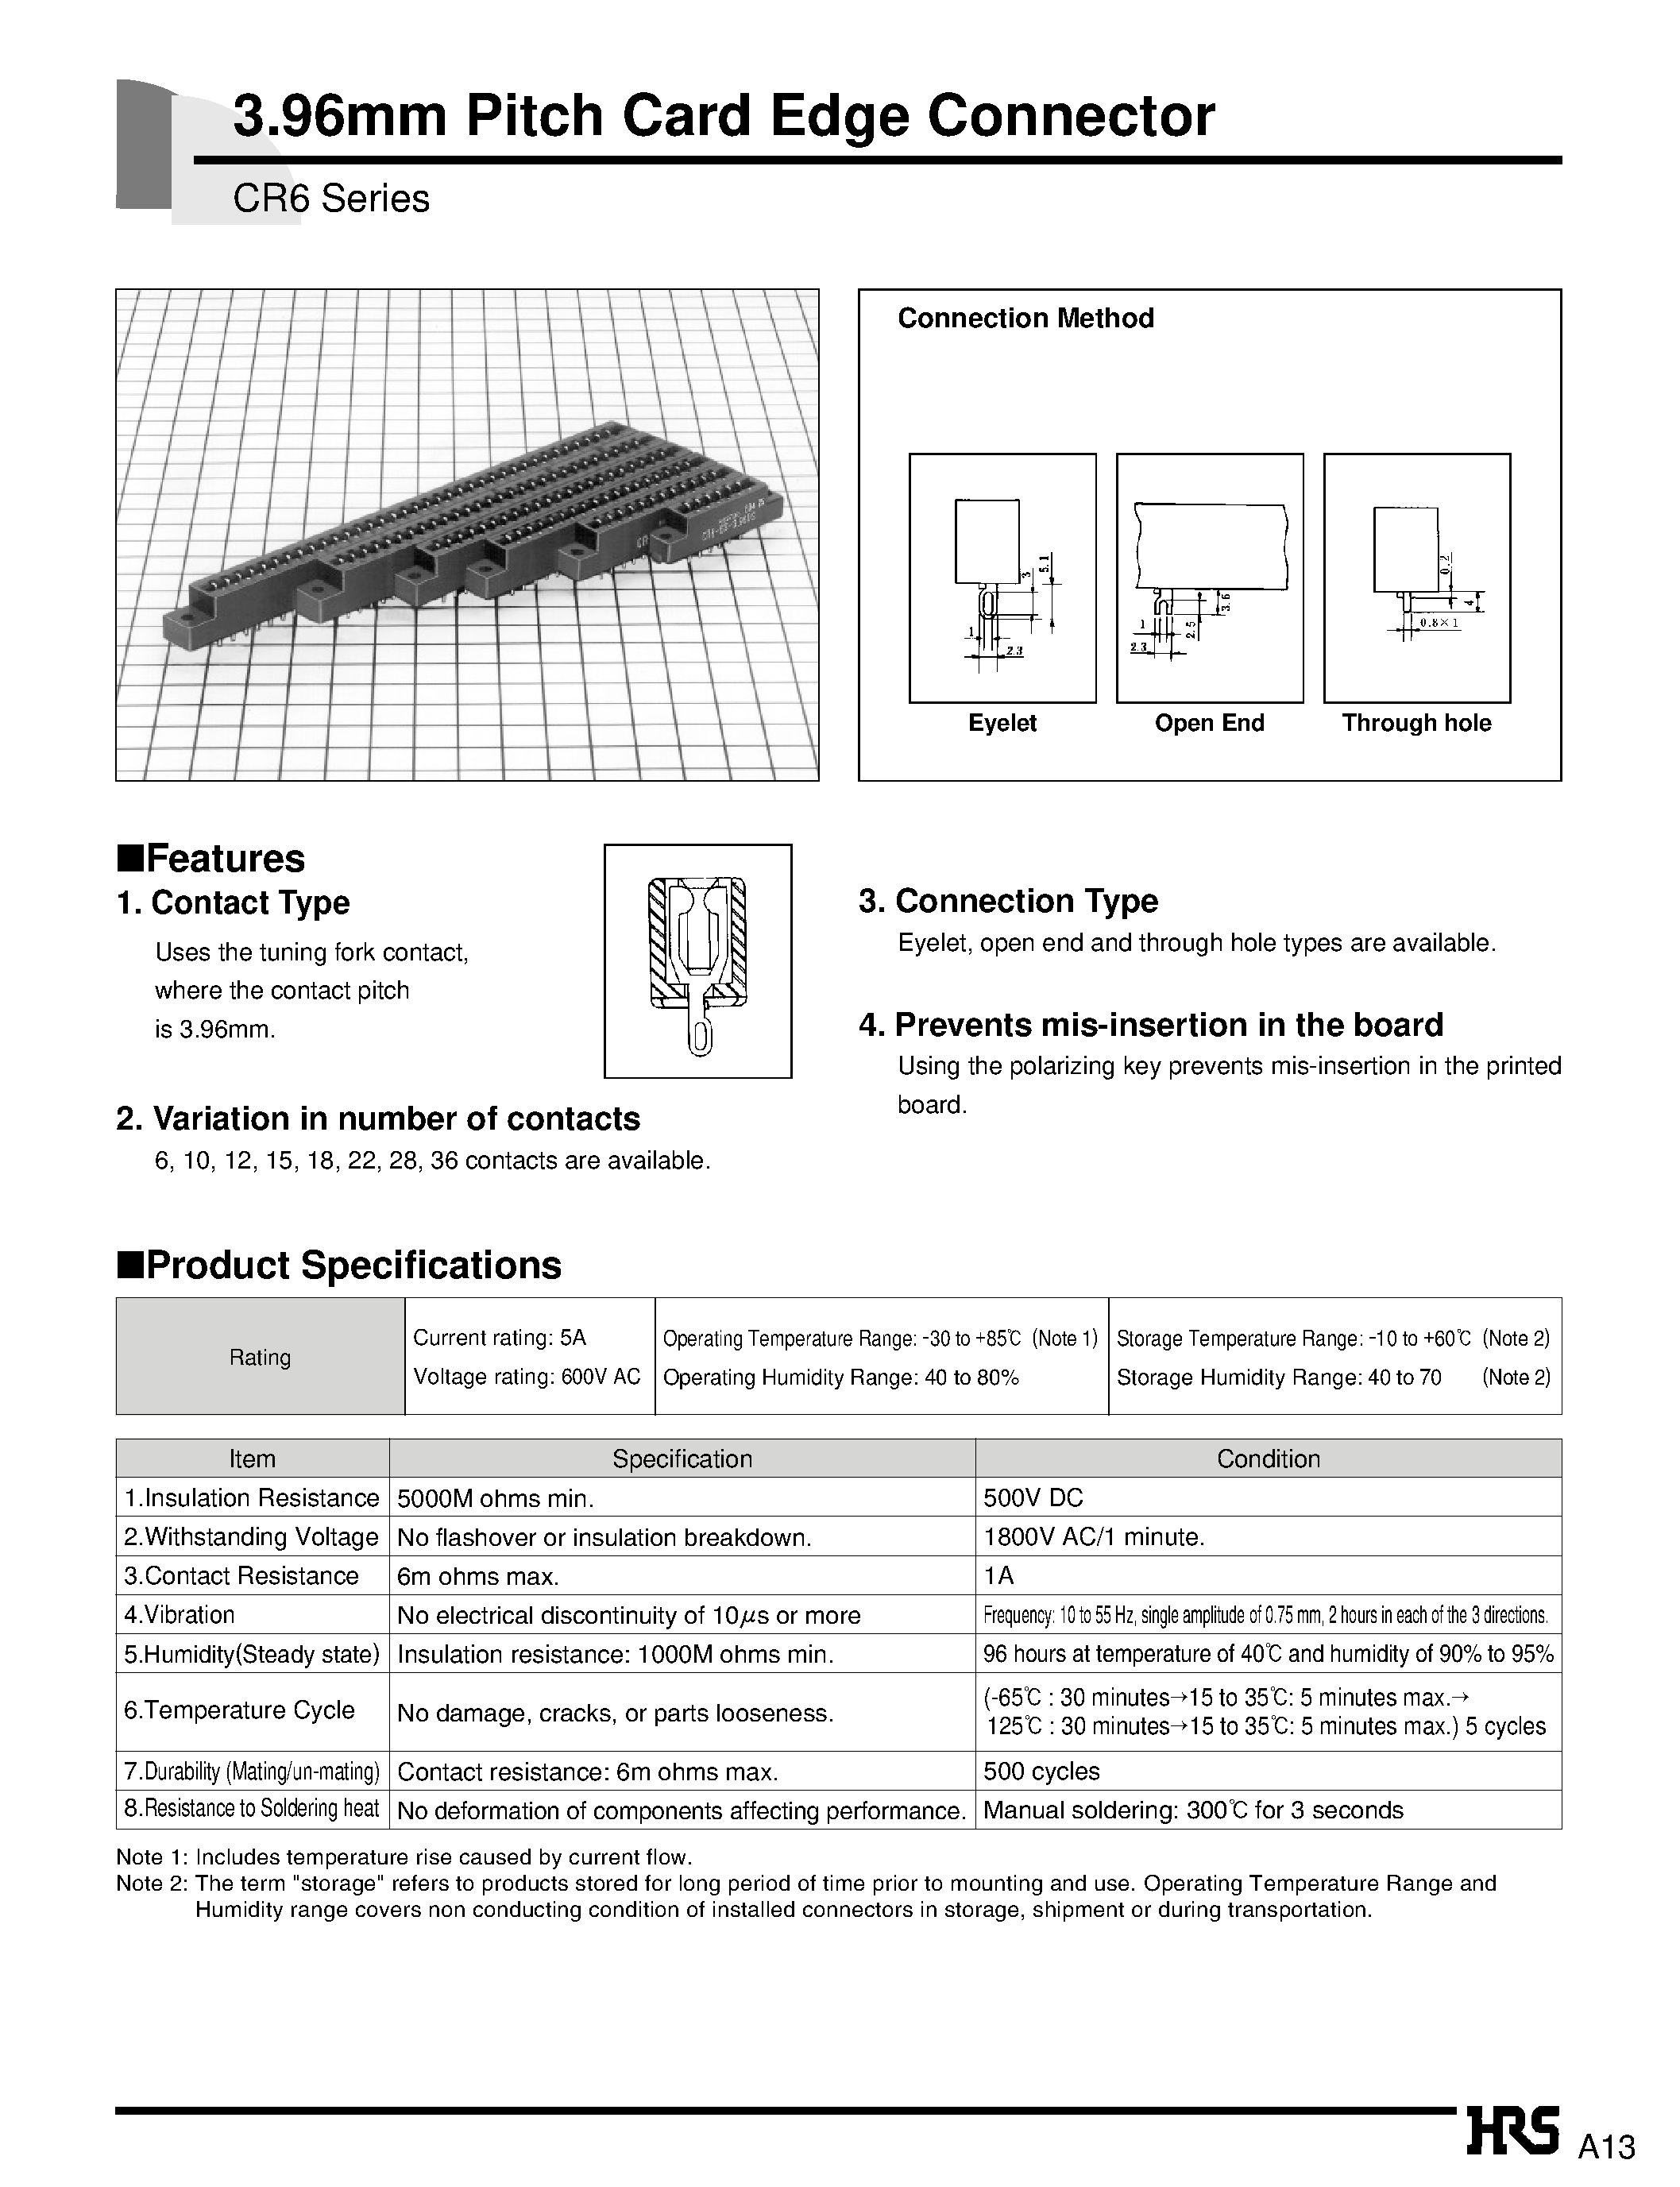 Datasheet CR6-36S-3.96E - 3.96mm Pitch Card Edge Connector page 1